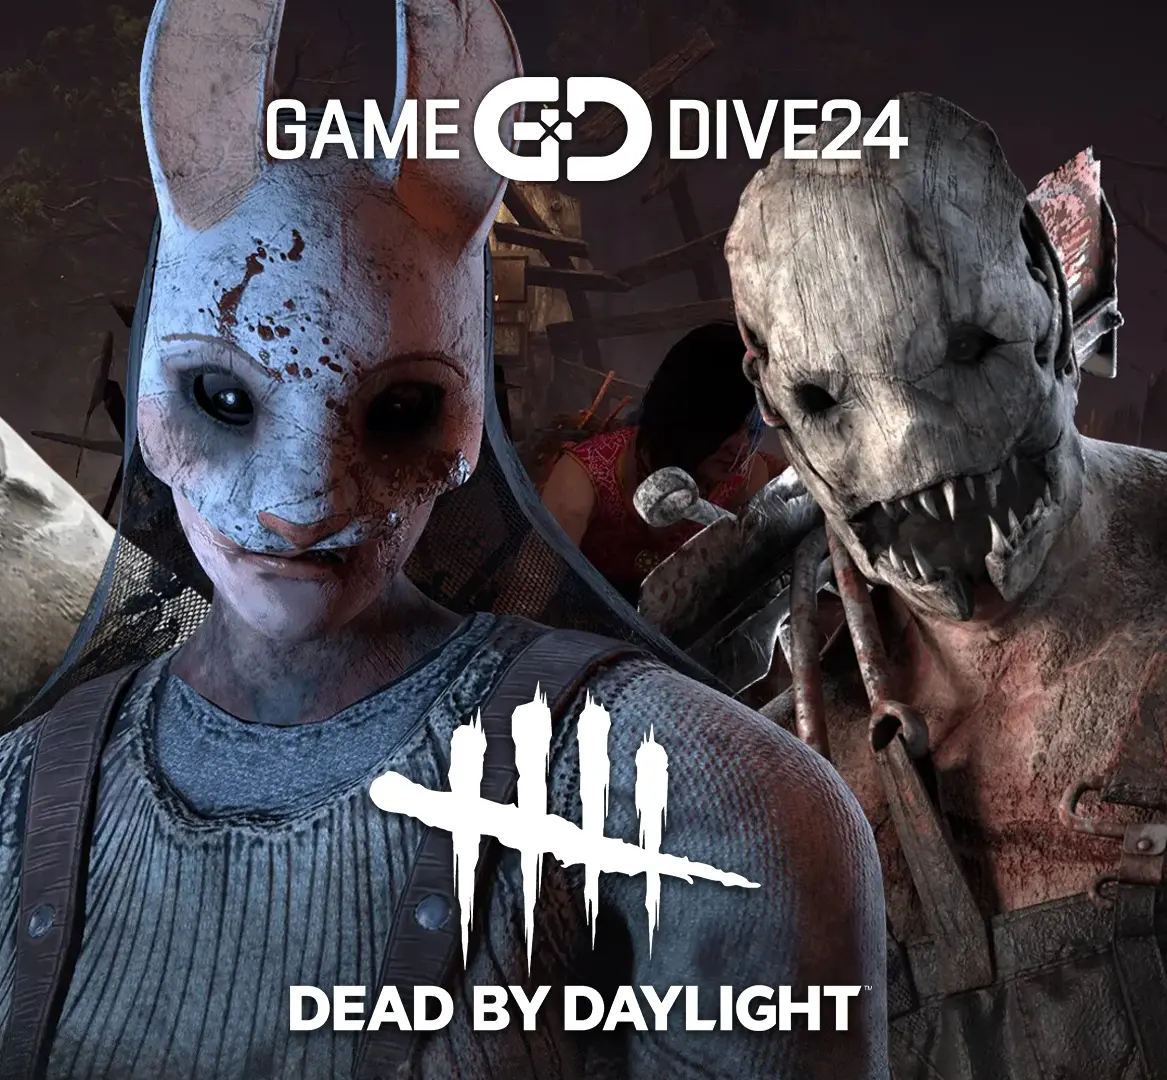 Which Killer to Buy Dead by Daylight